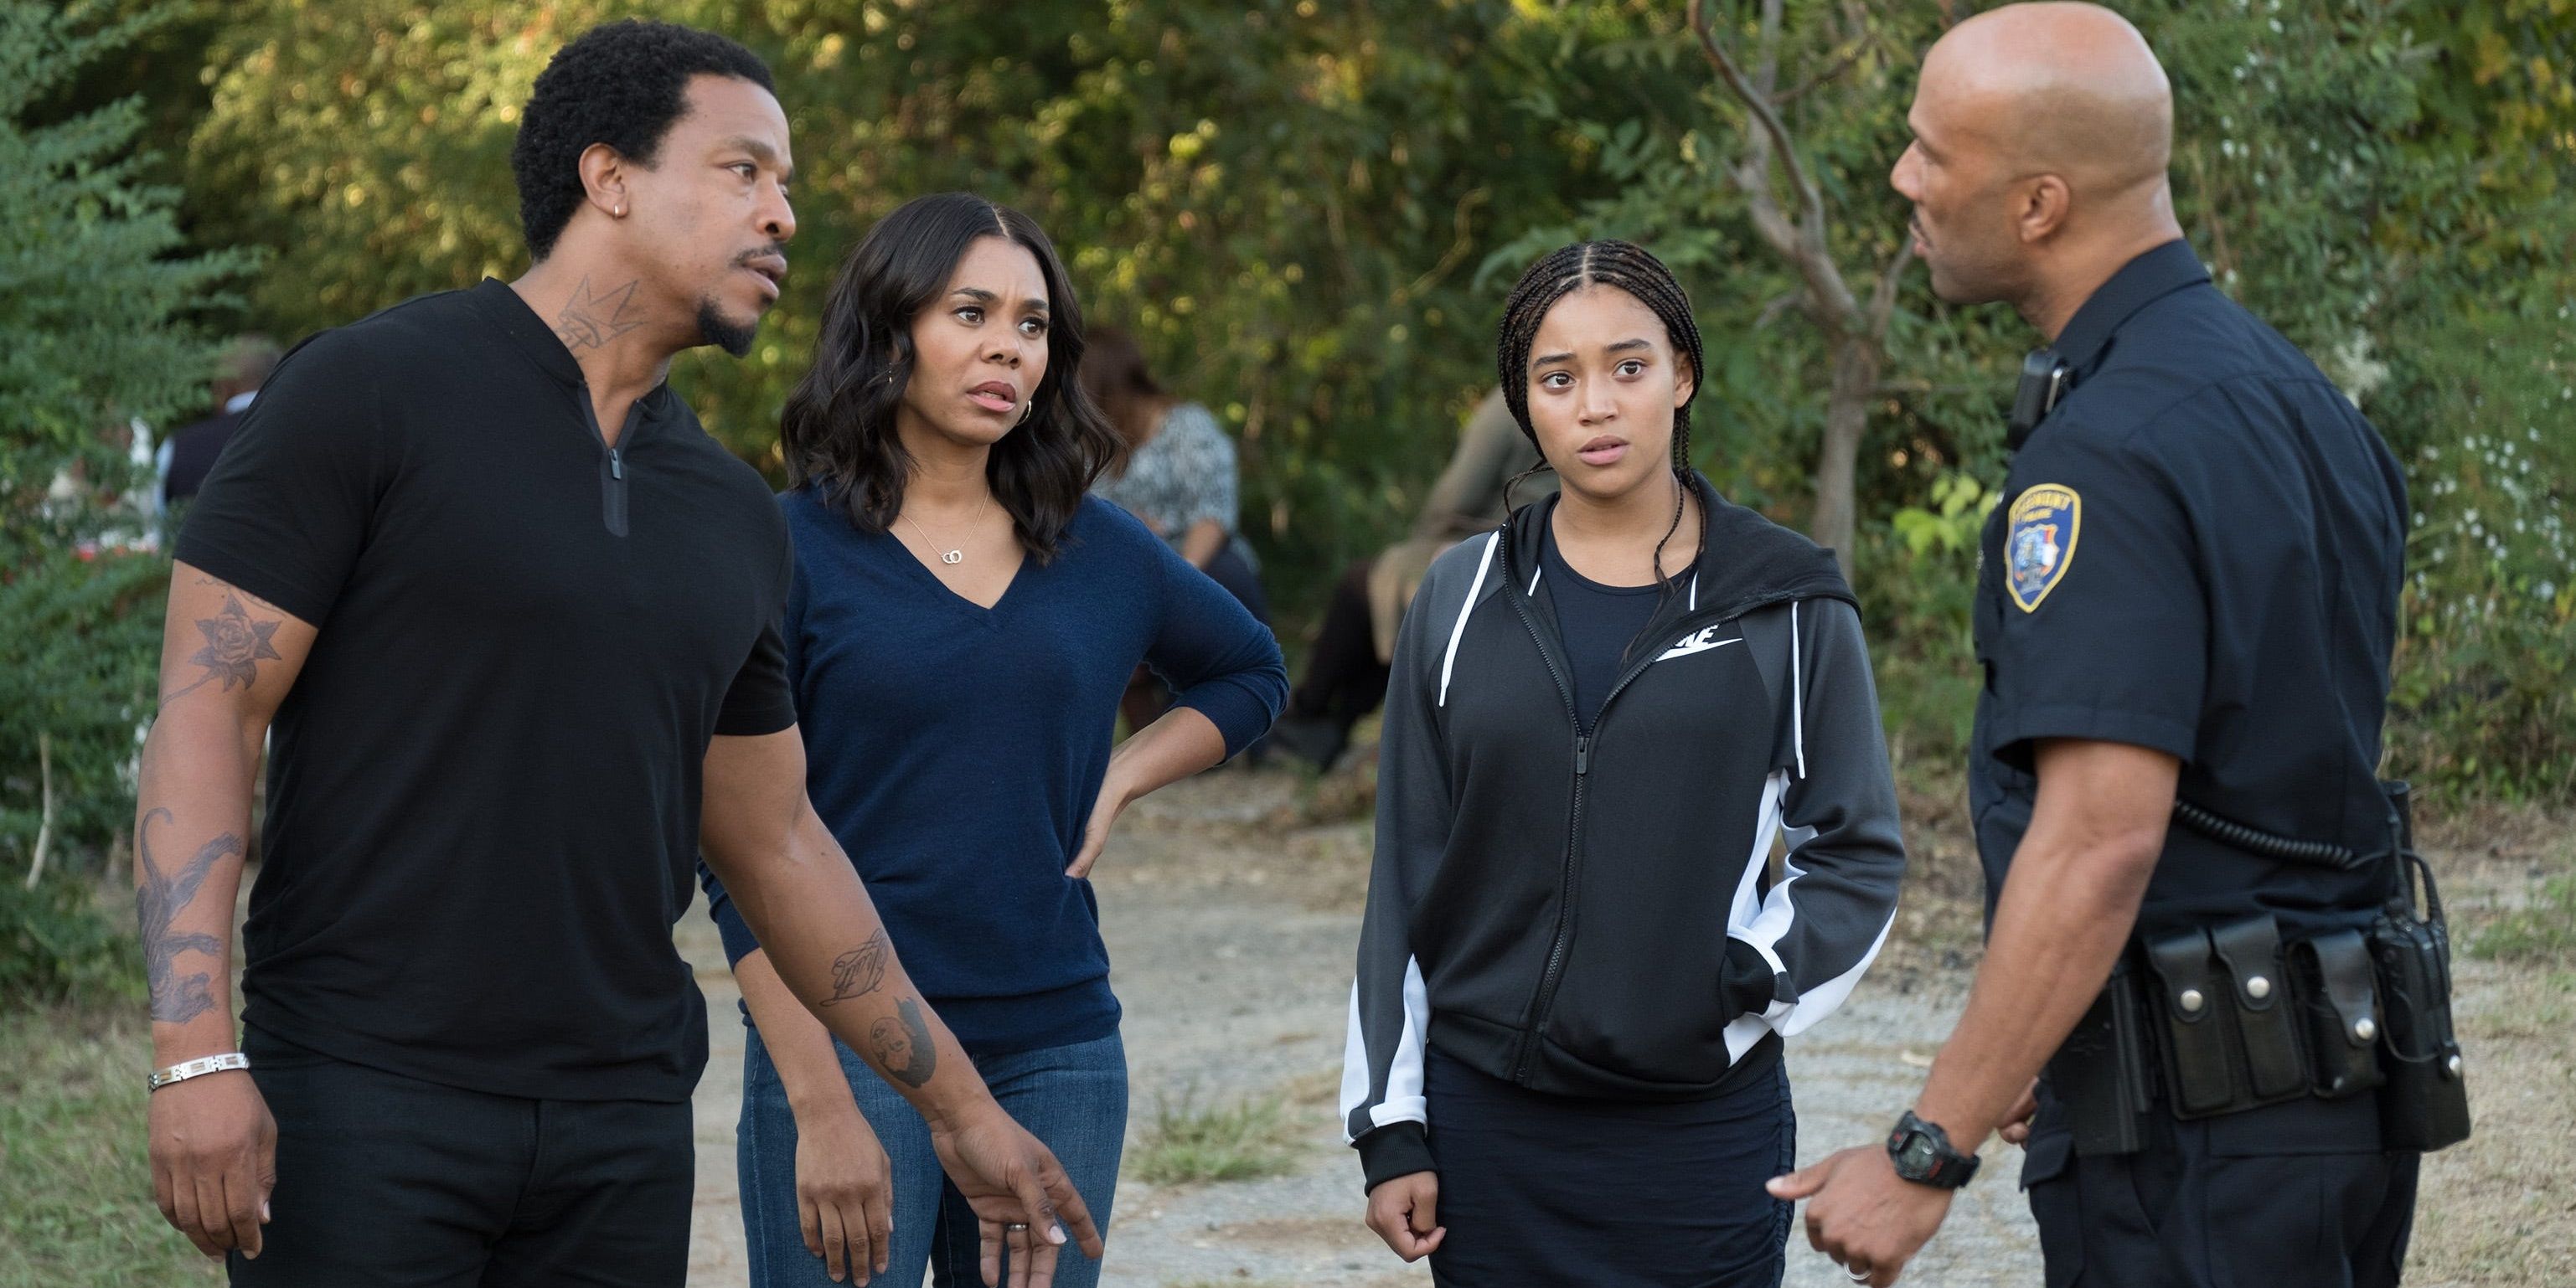 Starr's family in the hate u give movie